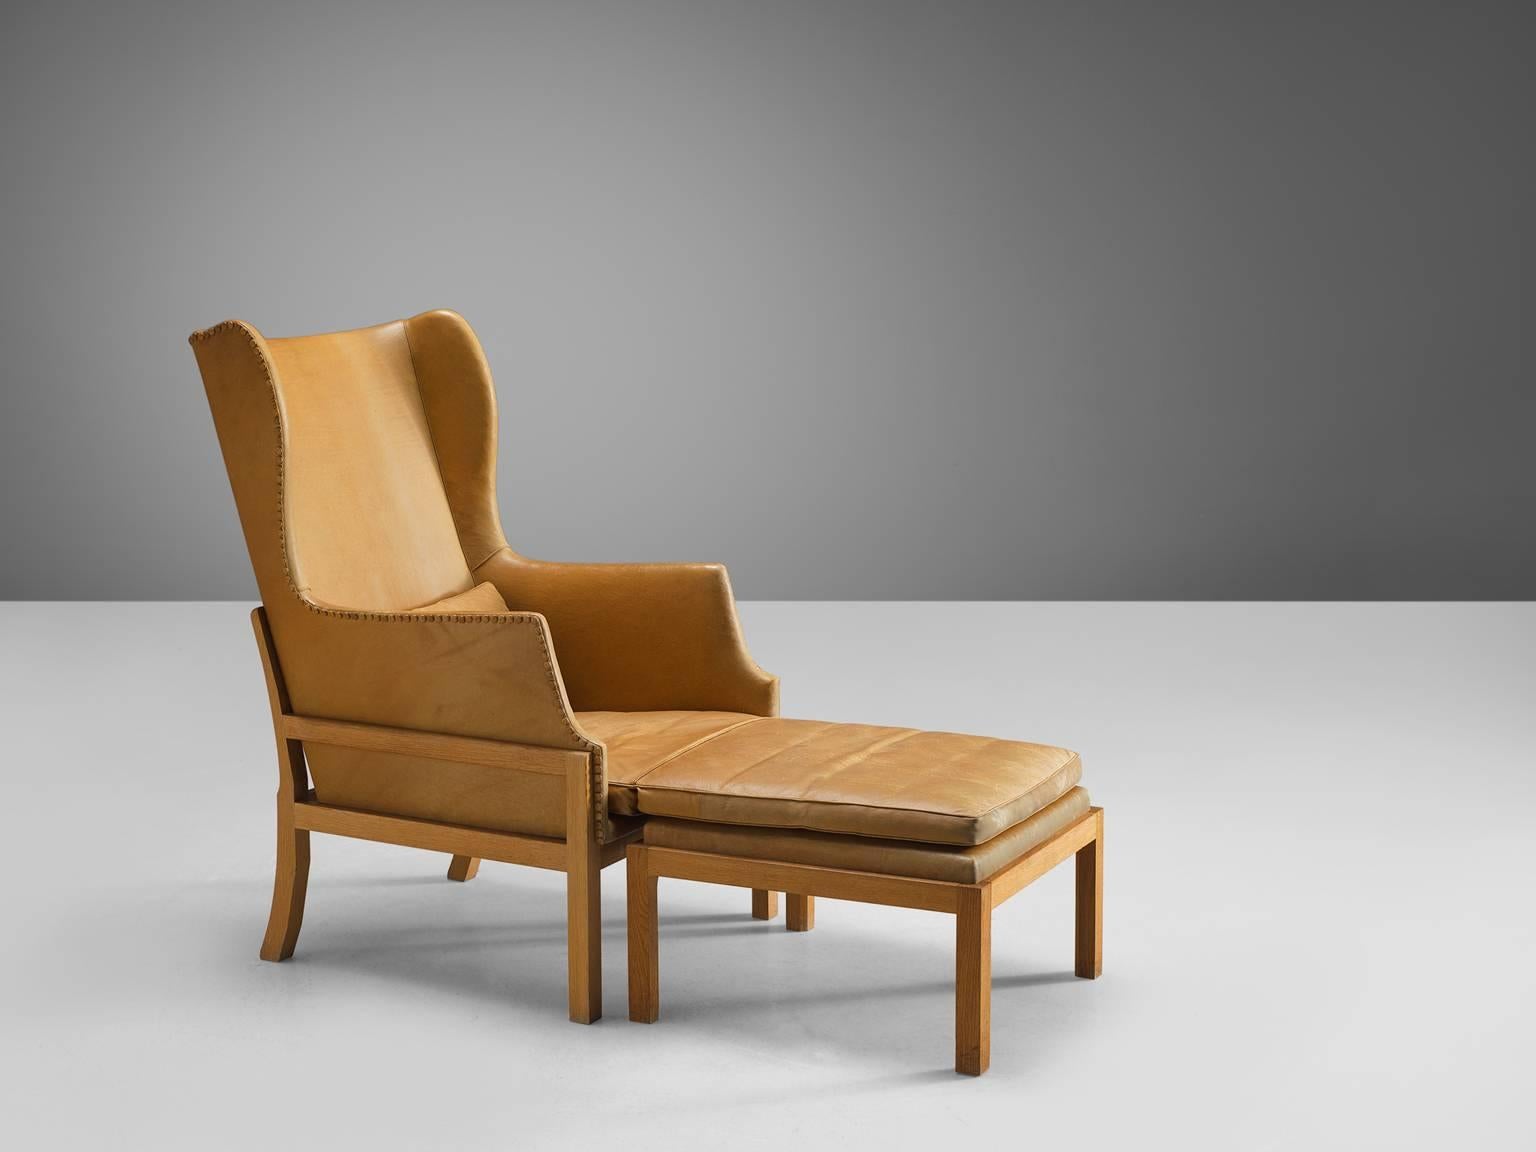 Mogens Koch for Ivan Schlechter, wingback chair and ottoman, cognac leather, mahogany, Denmark, design 1936, manufactured 1970.

Elegant and comfortable armchair in mahogany and leather by Mogens Koch. This lounge chair was designed with high